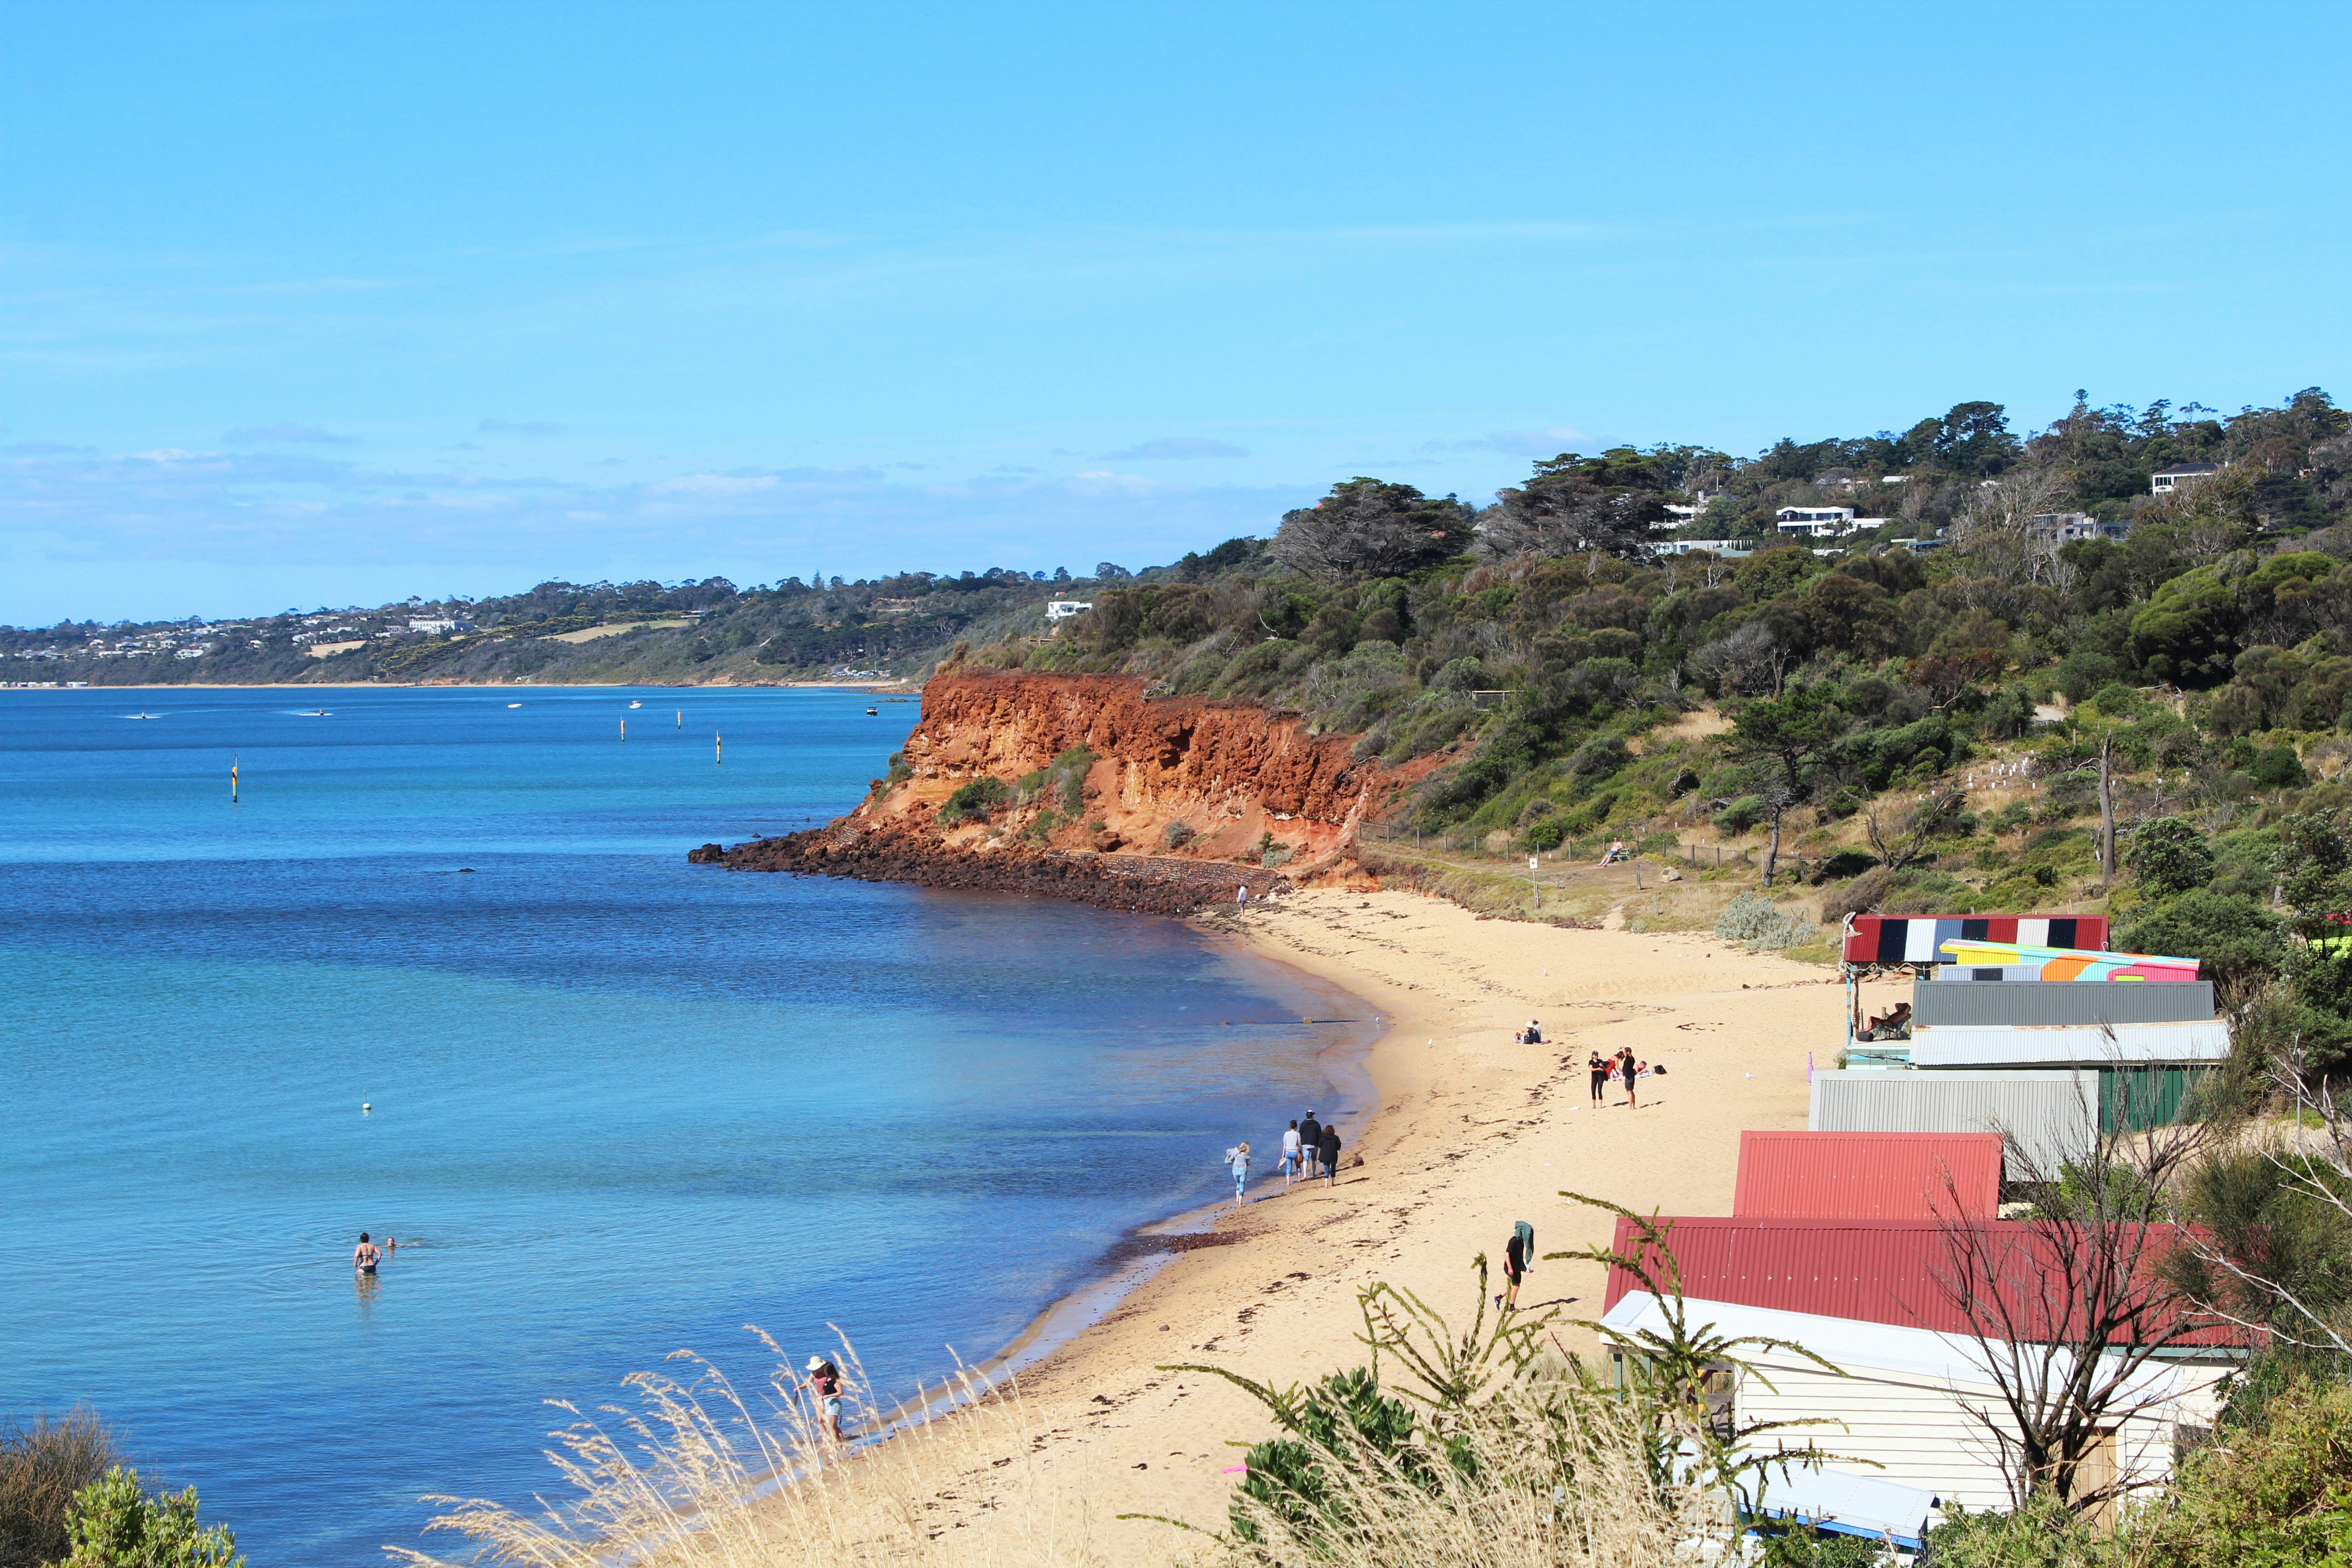 An elevated shot of Mornington’s Mothers Beach. A stretch of straw-coloured sand is sheltered in a small bay; several people are walking along the beach beside a few buildings, and a few people can be seen in the dark-blue water.